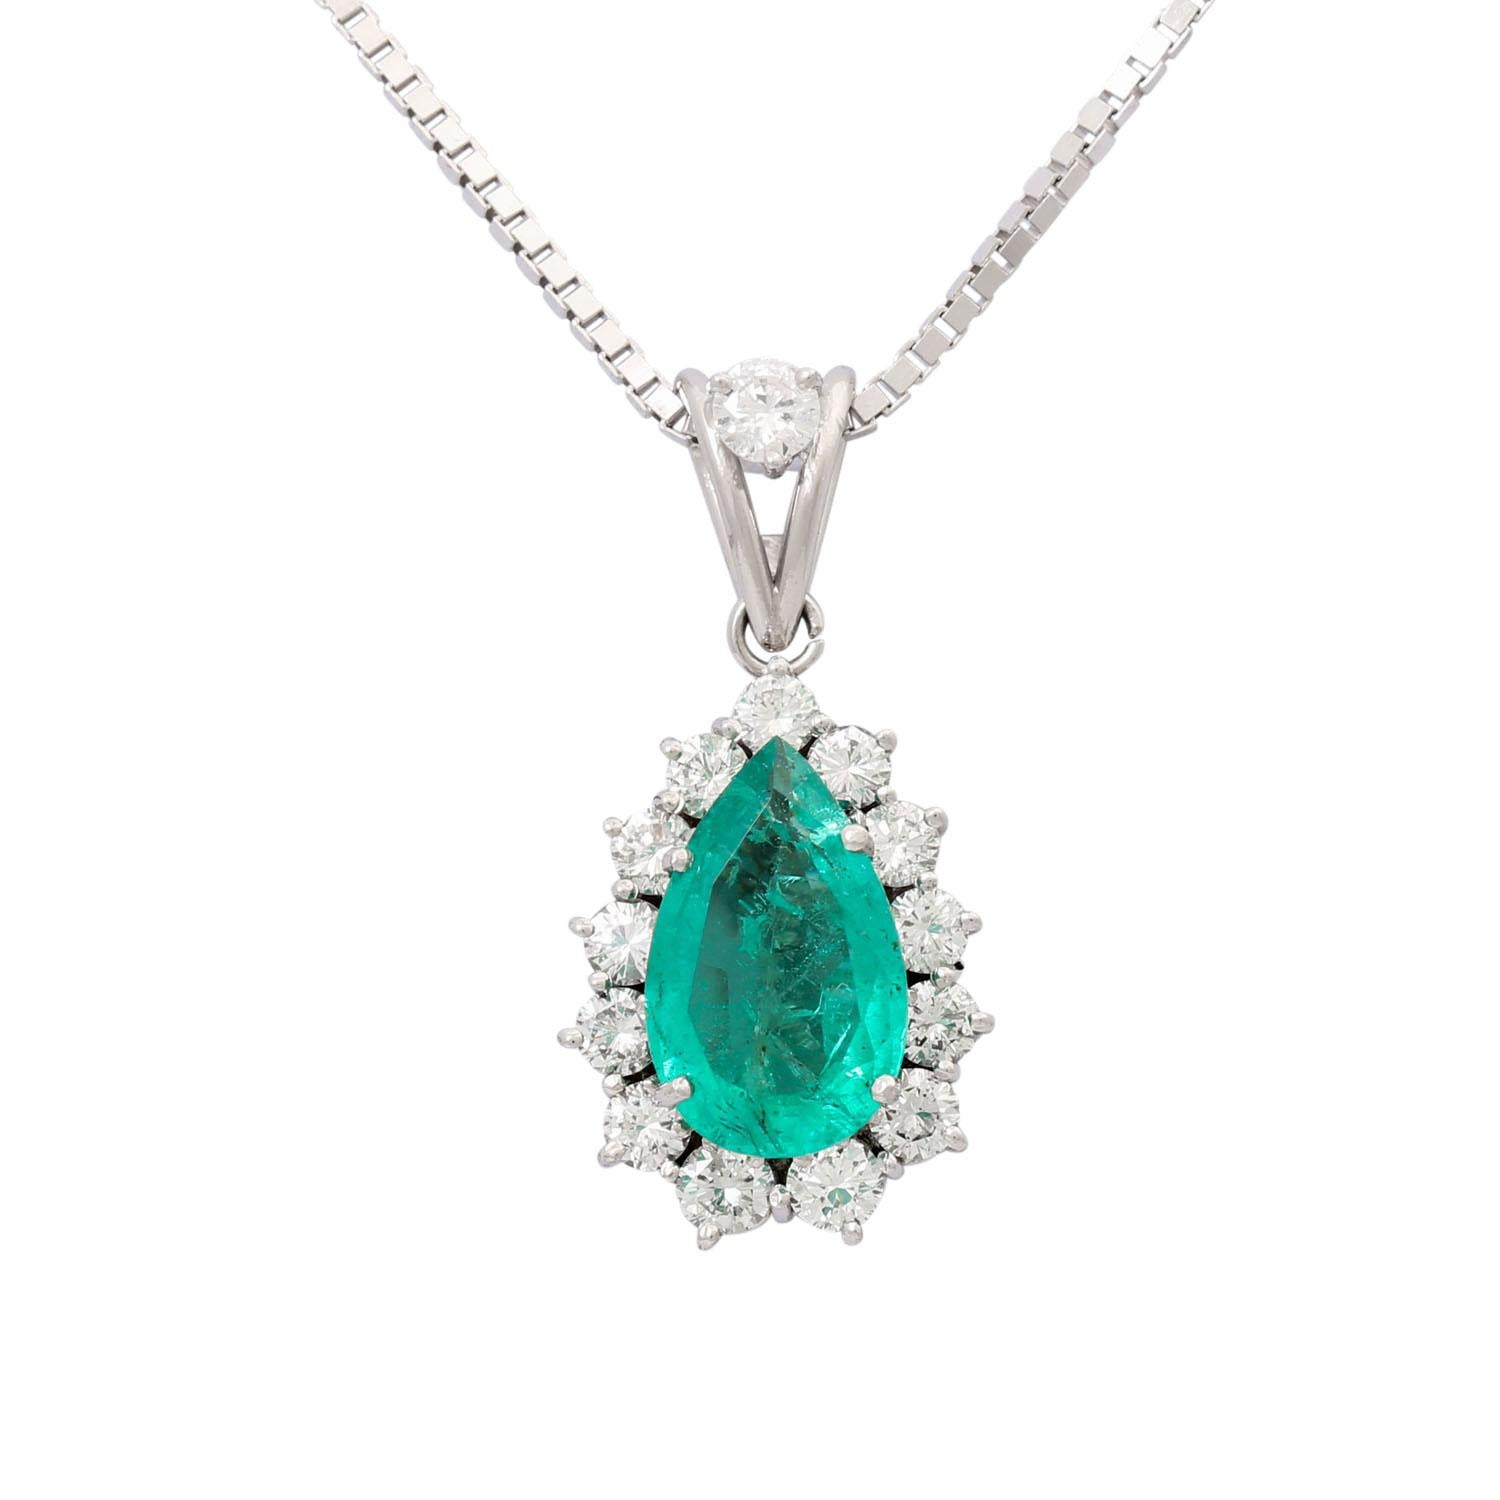 totaling approx. 0.70 ct, good color, low to medium purity, emerald approx. 2 ct, WG 14K, 7 g, chain length approx. 38 cm, 2nd half of the 20th century, slight signs of wear, incl. expert's report copy (1990).
